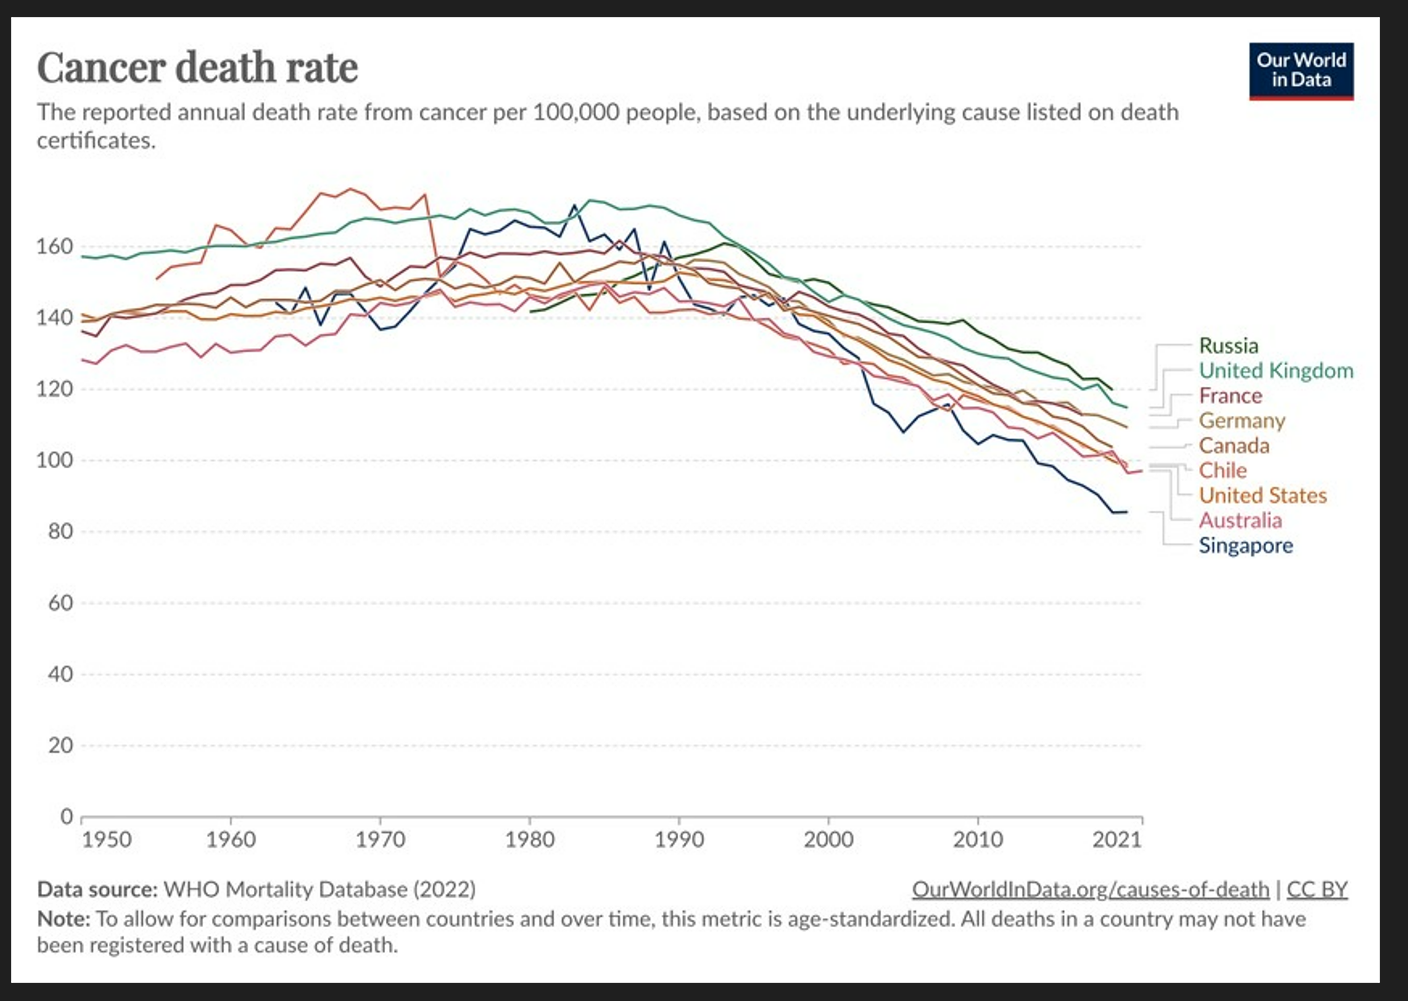 Multi-colored line chart showing annual cancer death rates by country, from 1950 to today. Chart shows how cancer death rates have decrease from 150 to 100 per 100,000 people over this time period.